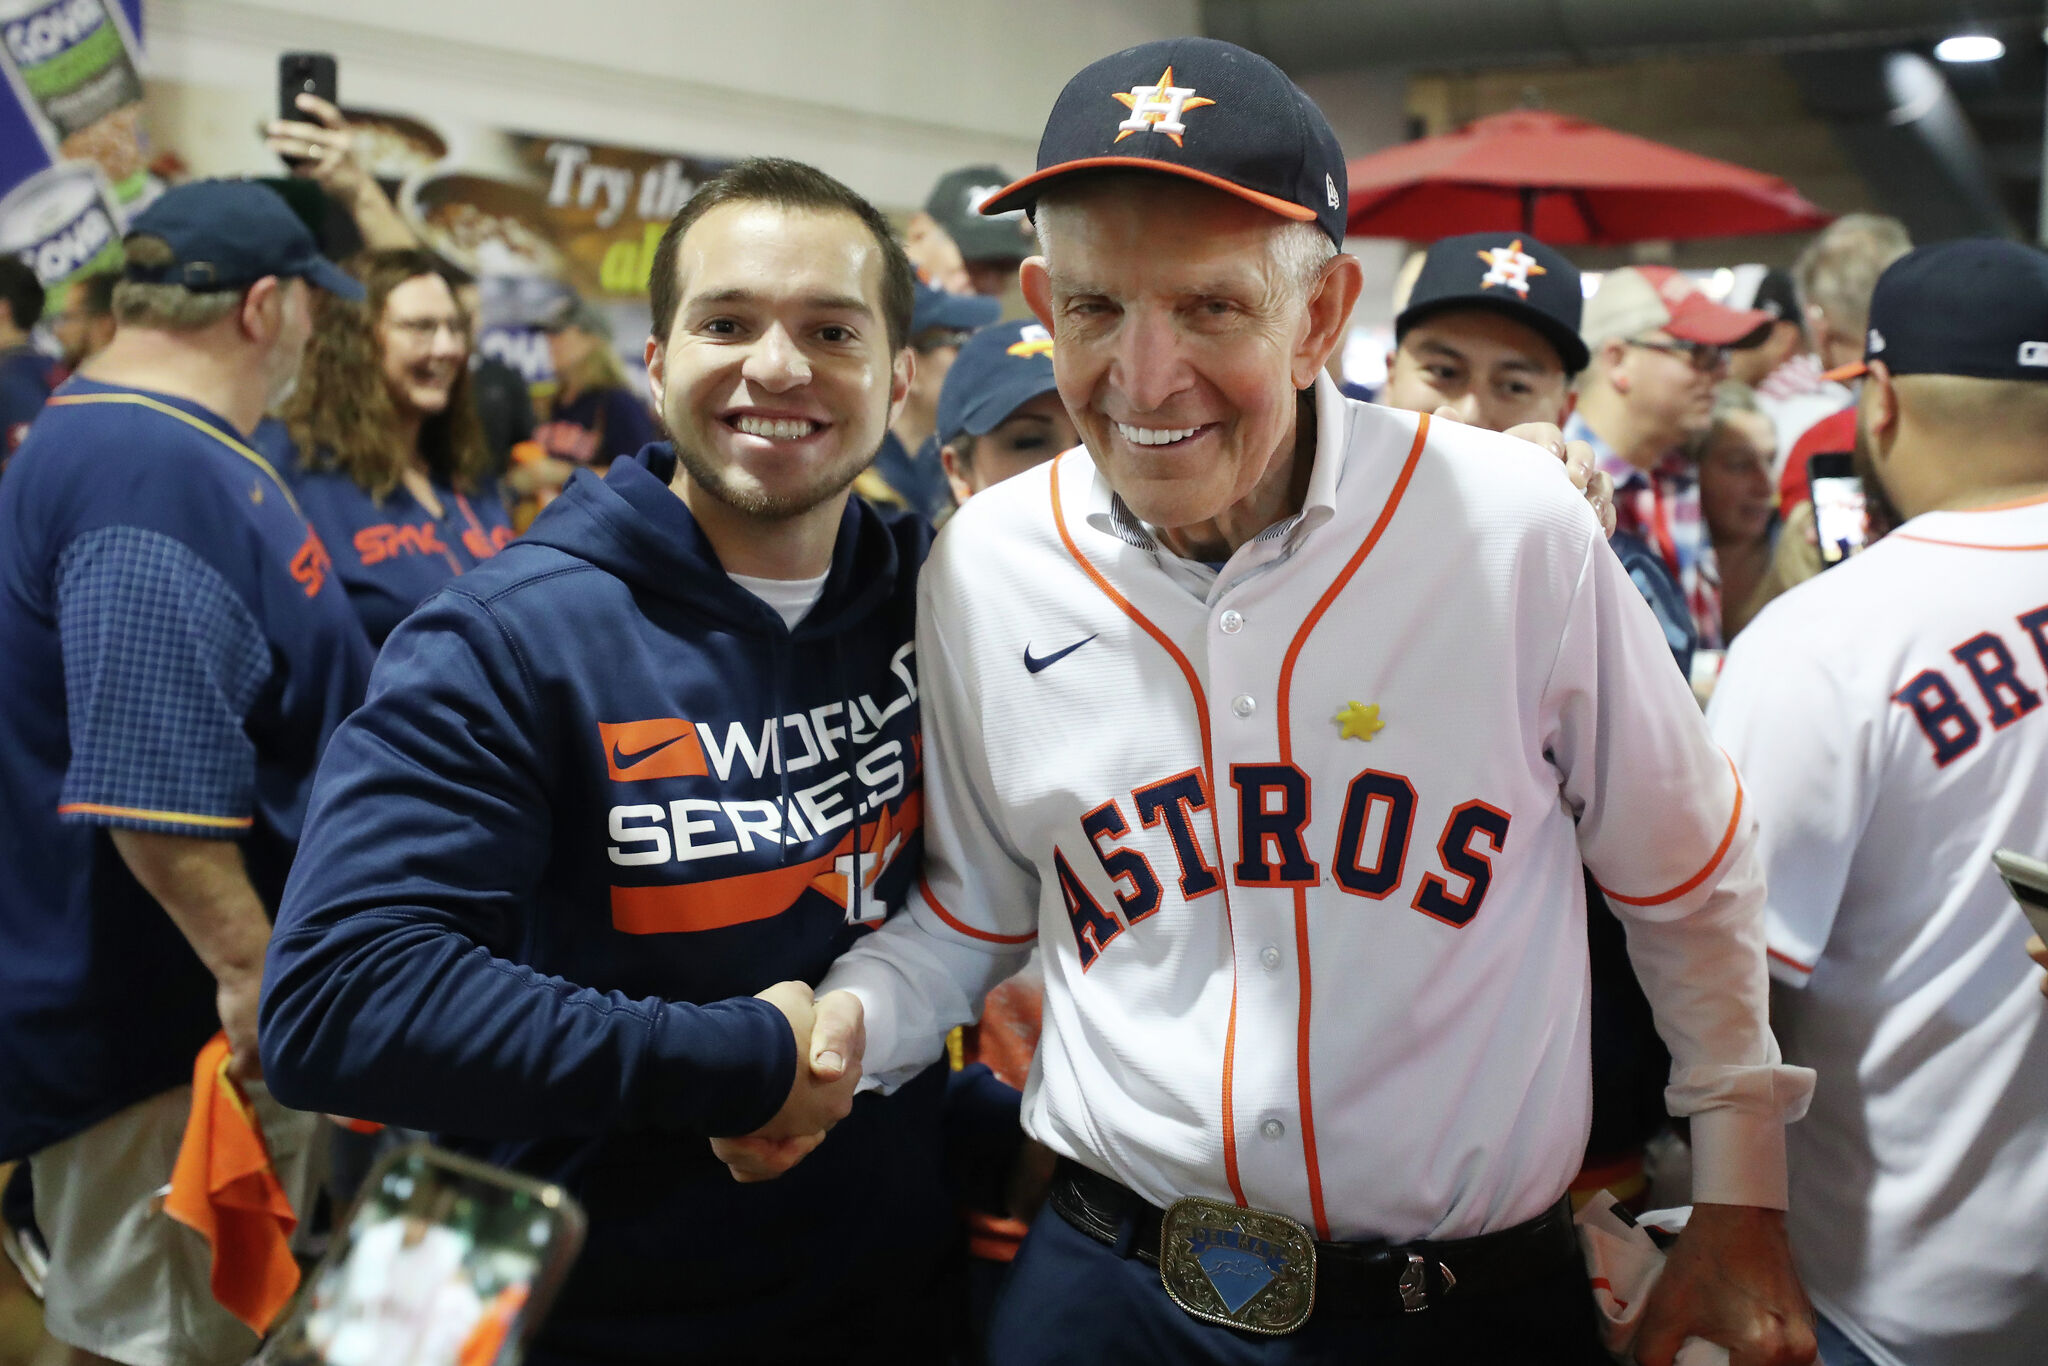 Mattress Mack throws out first pitch before Game 6 of World Series